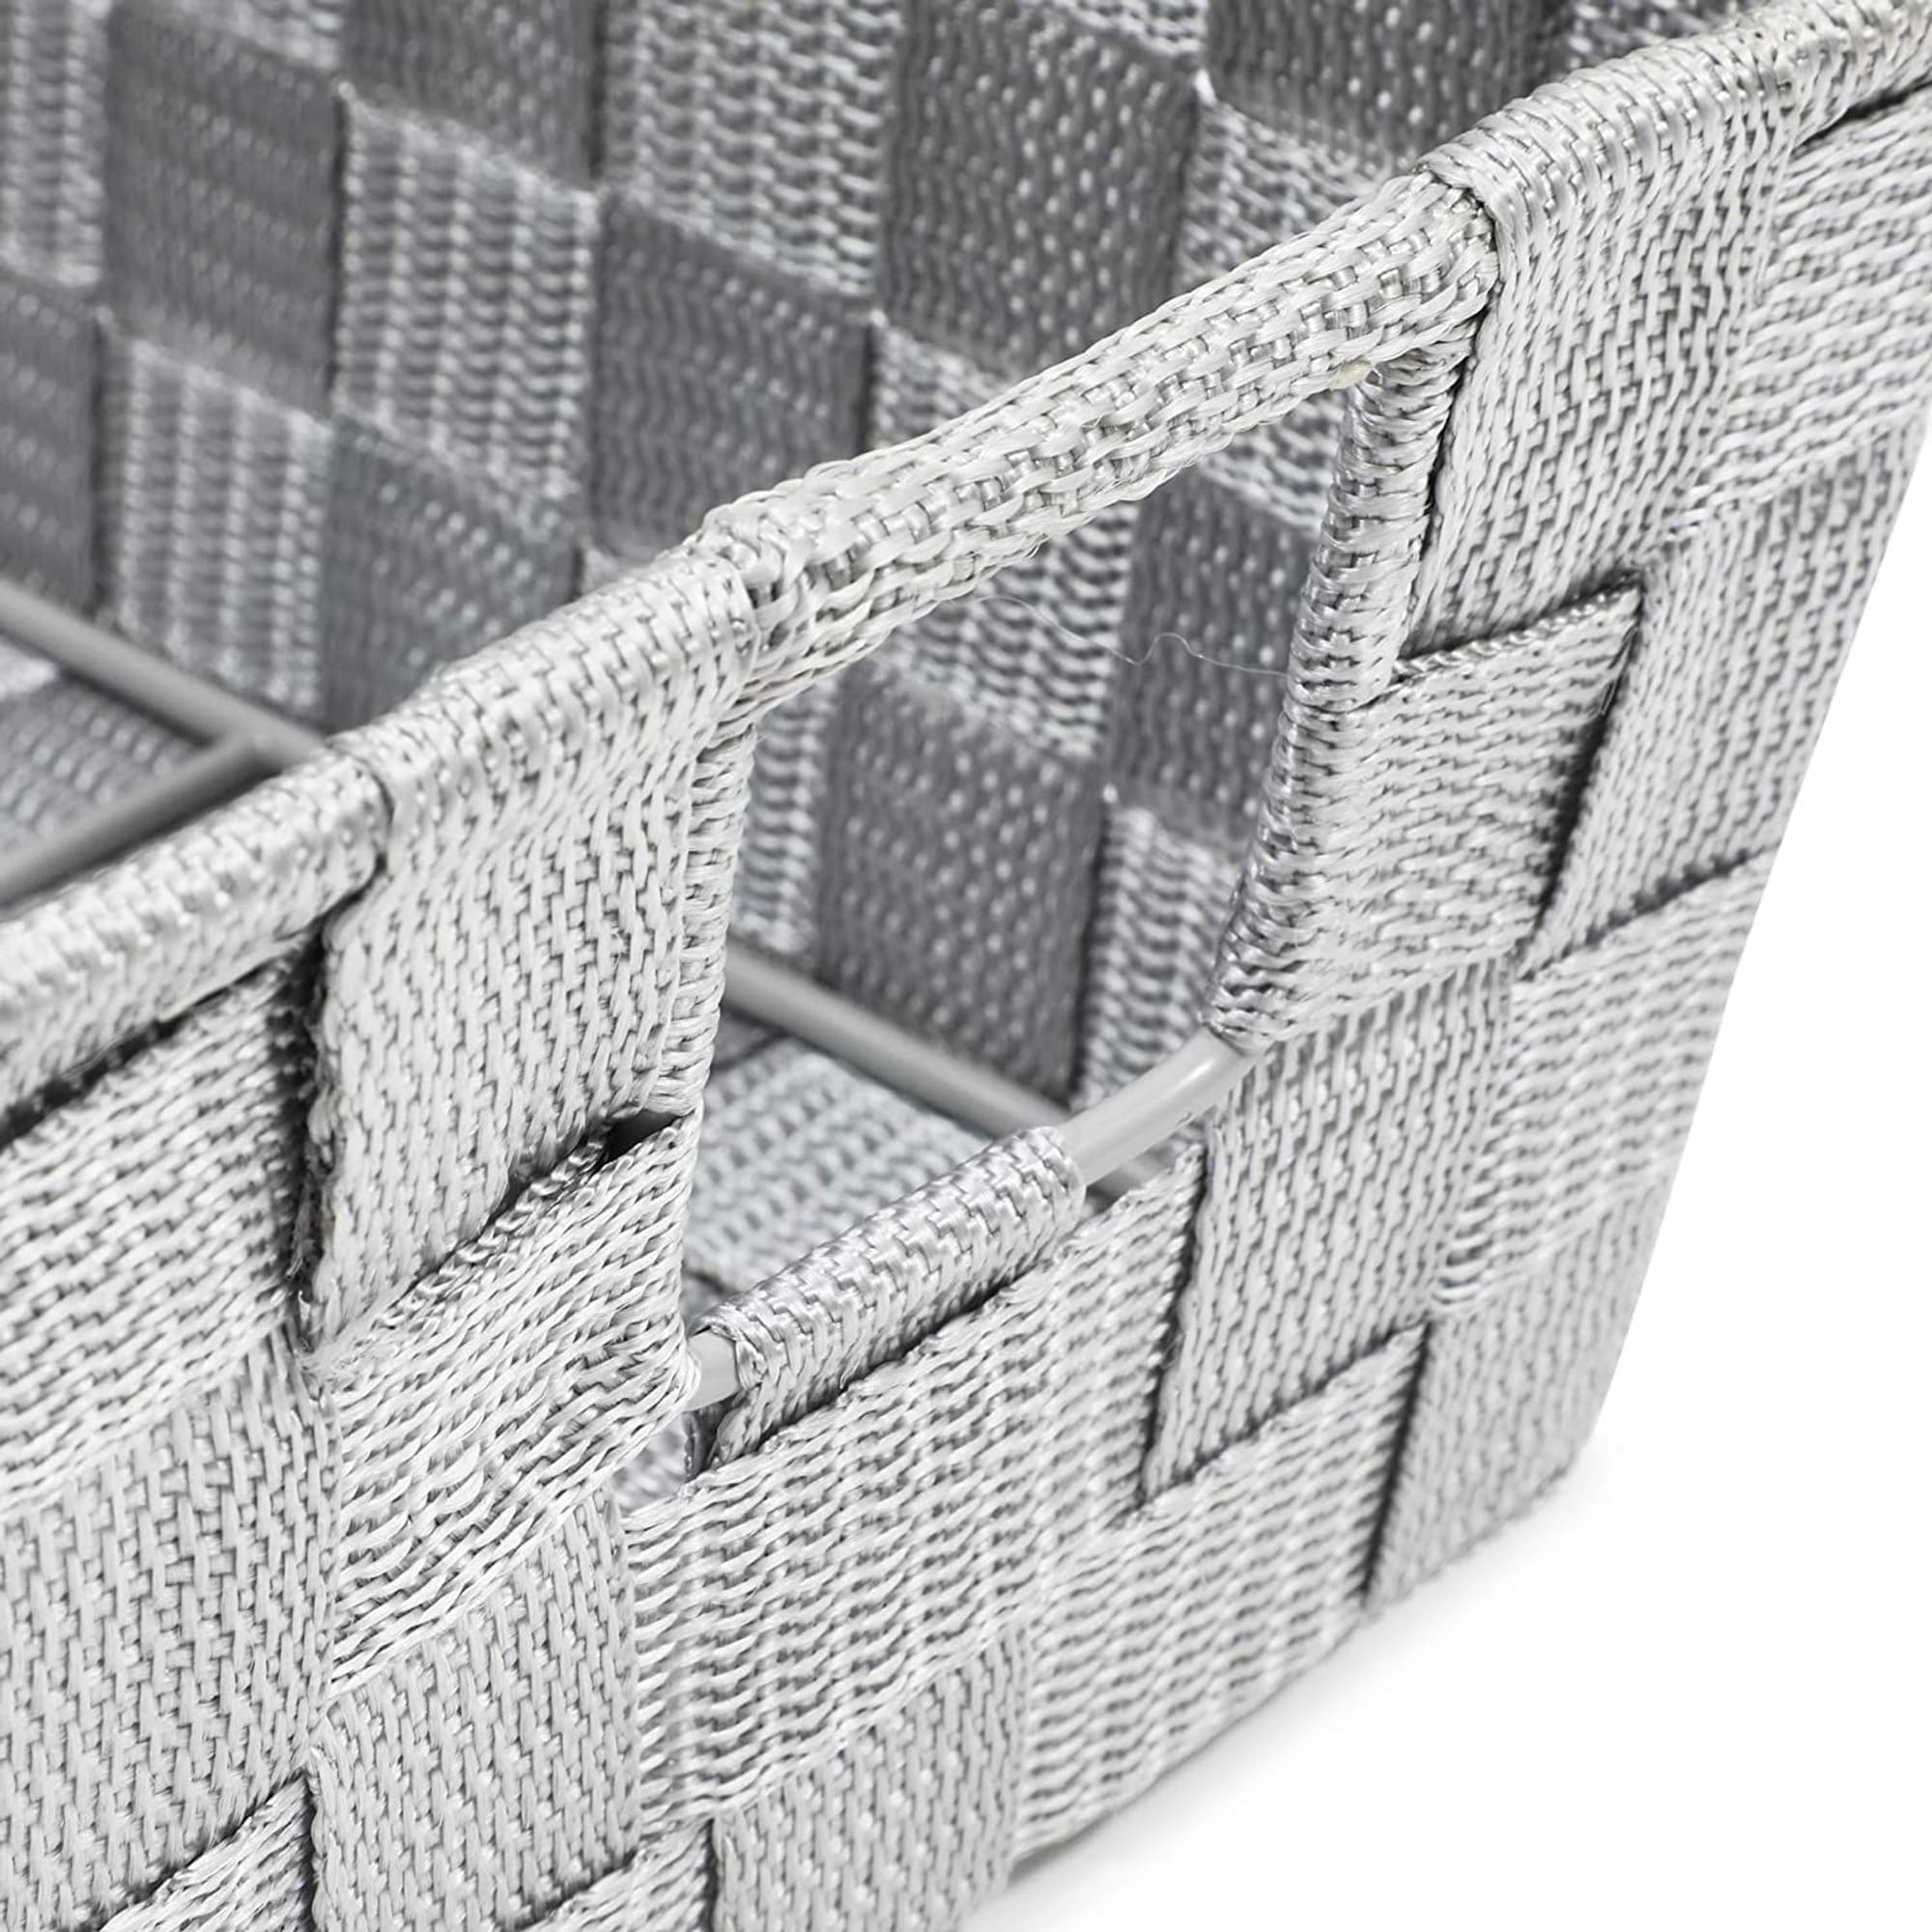 https://ak1.ostkcdn.com/images/products/is/images/direct/169722d7415f852f95d10d32fc82cc3e076bd5ac/Farmlyn-Creek-Grey-Woven-Basket-for-Bathroom%2C-Closet-and-Pantry-Storage-%2811.4-x-6.5-x-4.5-in%29.jpg